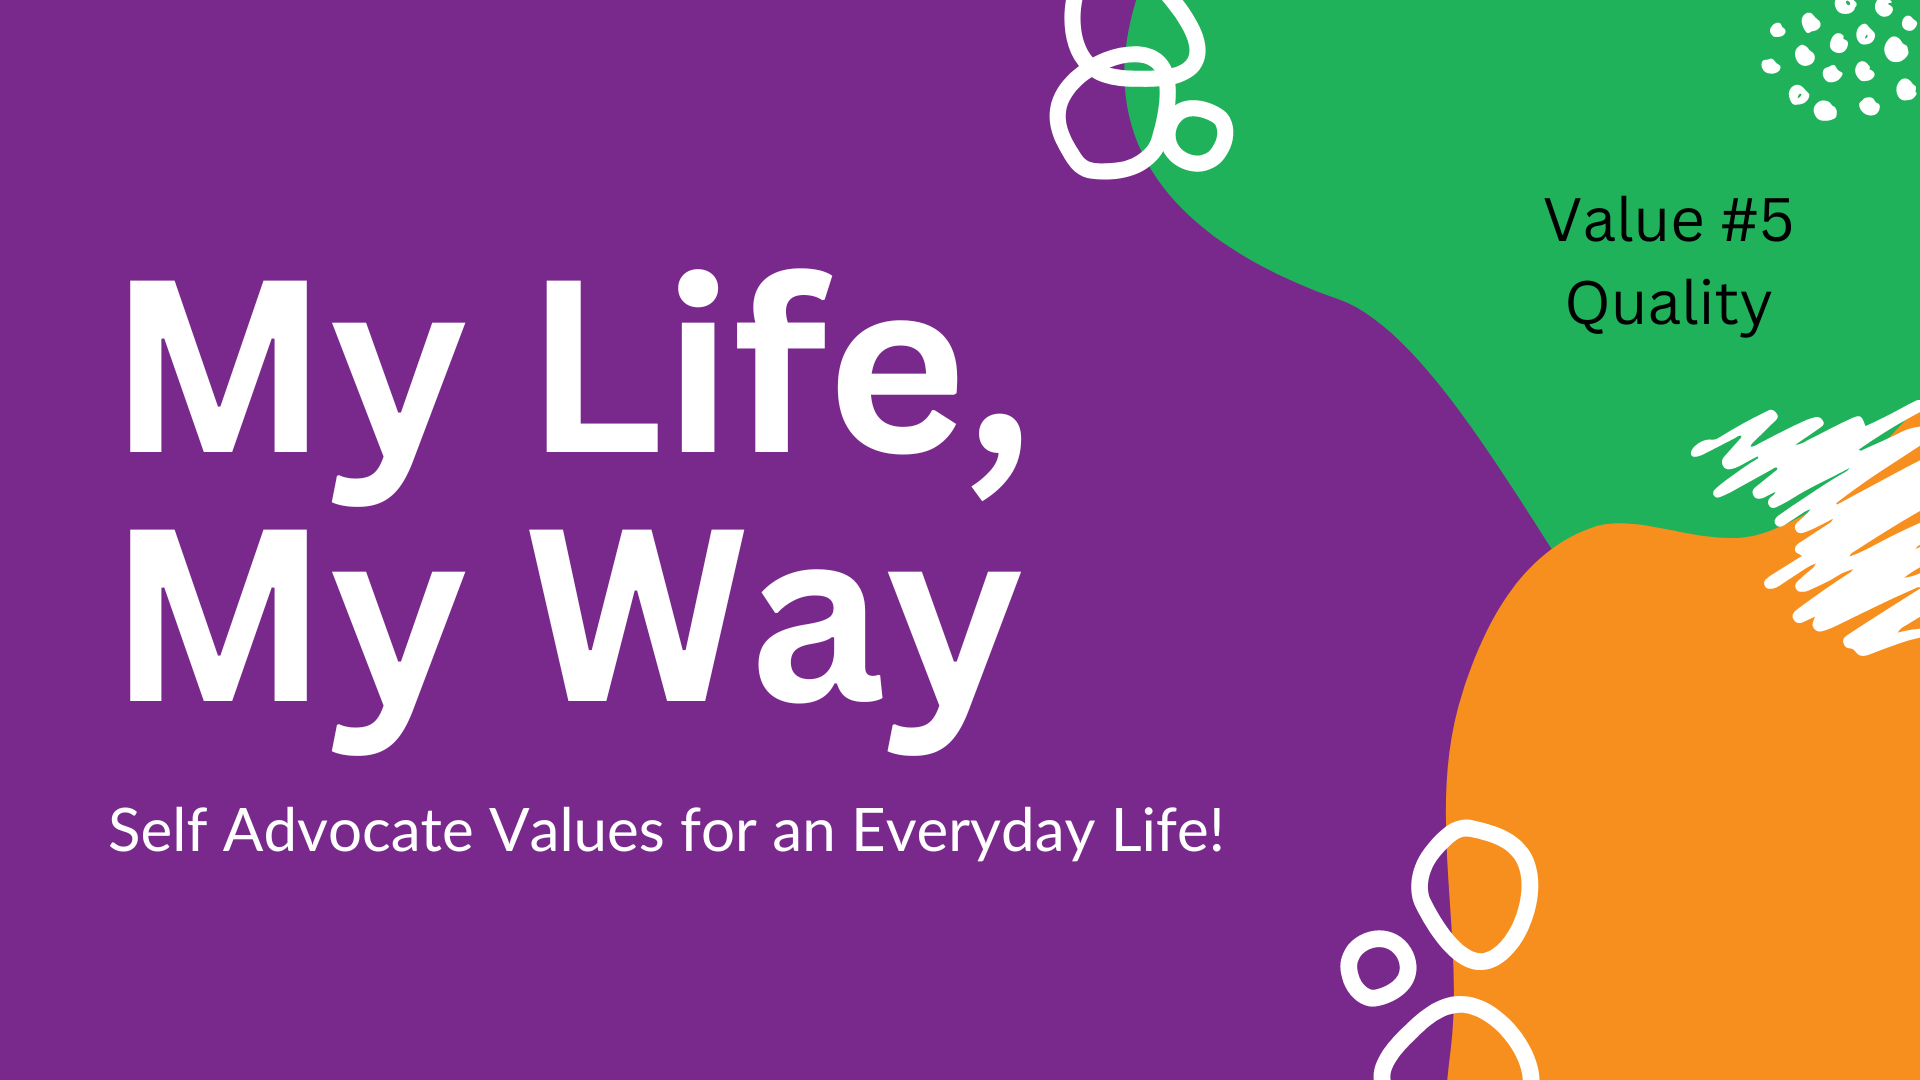 My Life My Way: The Power of Quality in Your Life